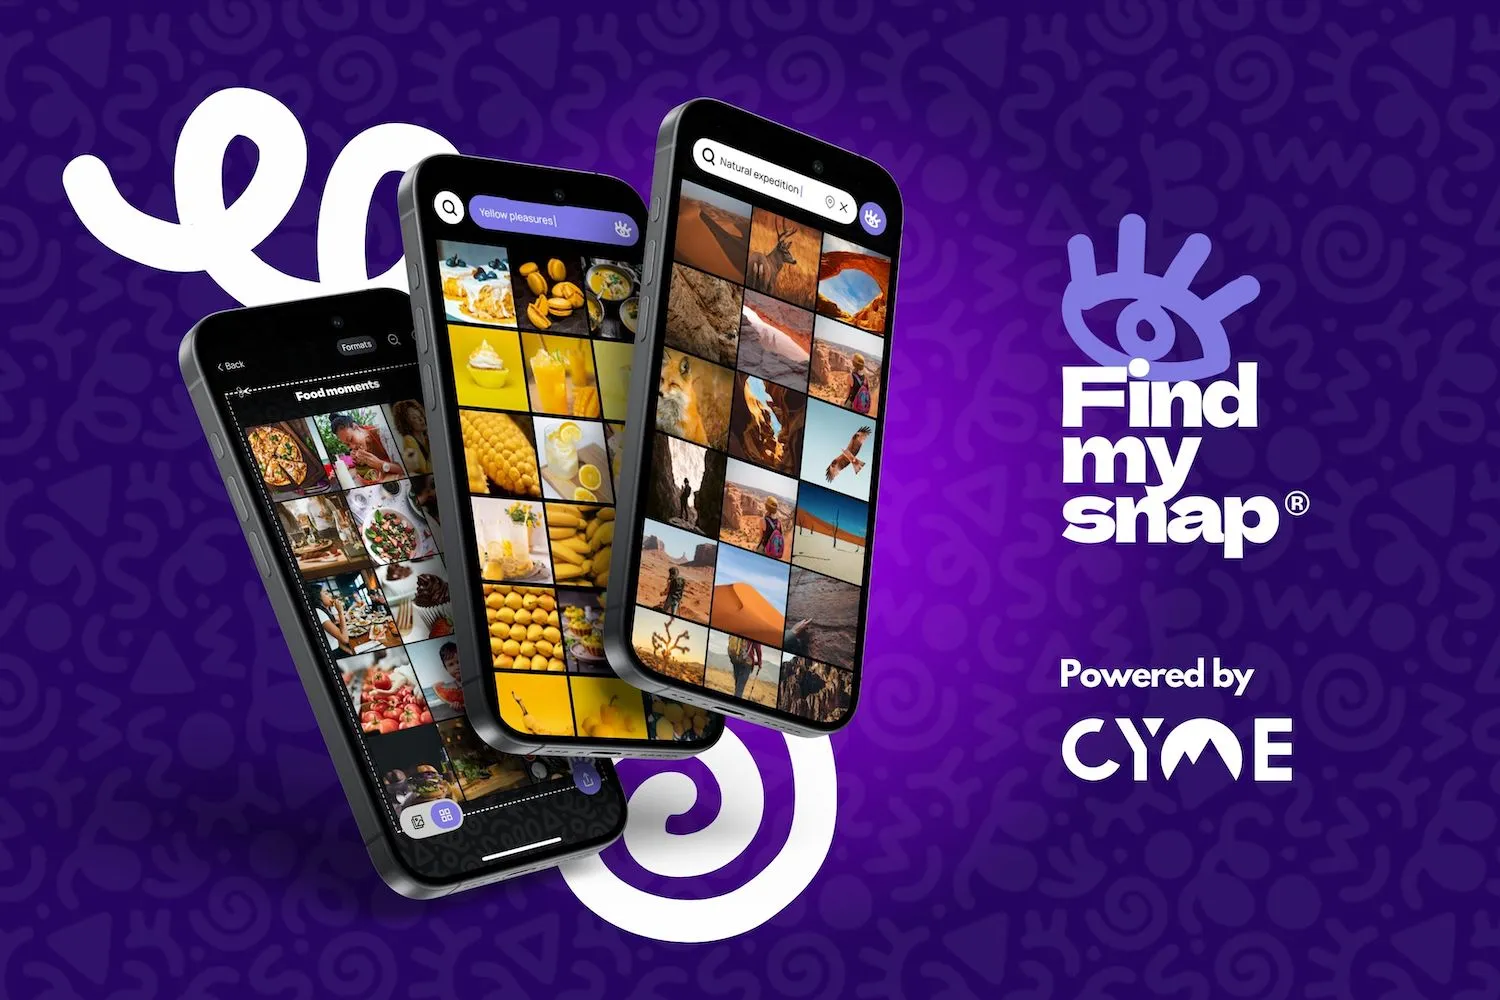 FindMySnap: image search engine on iPhone